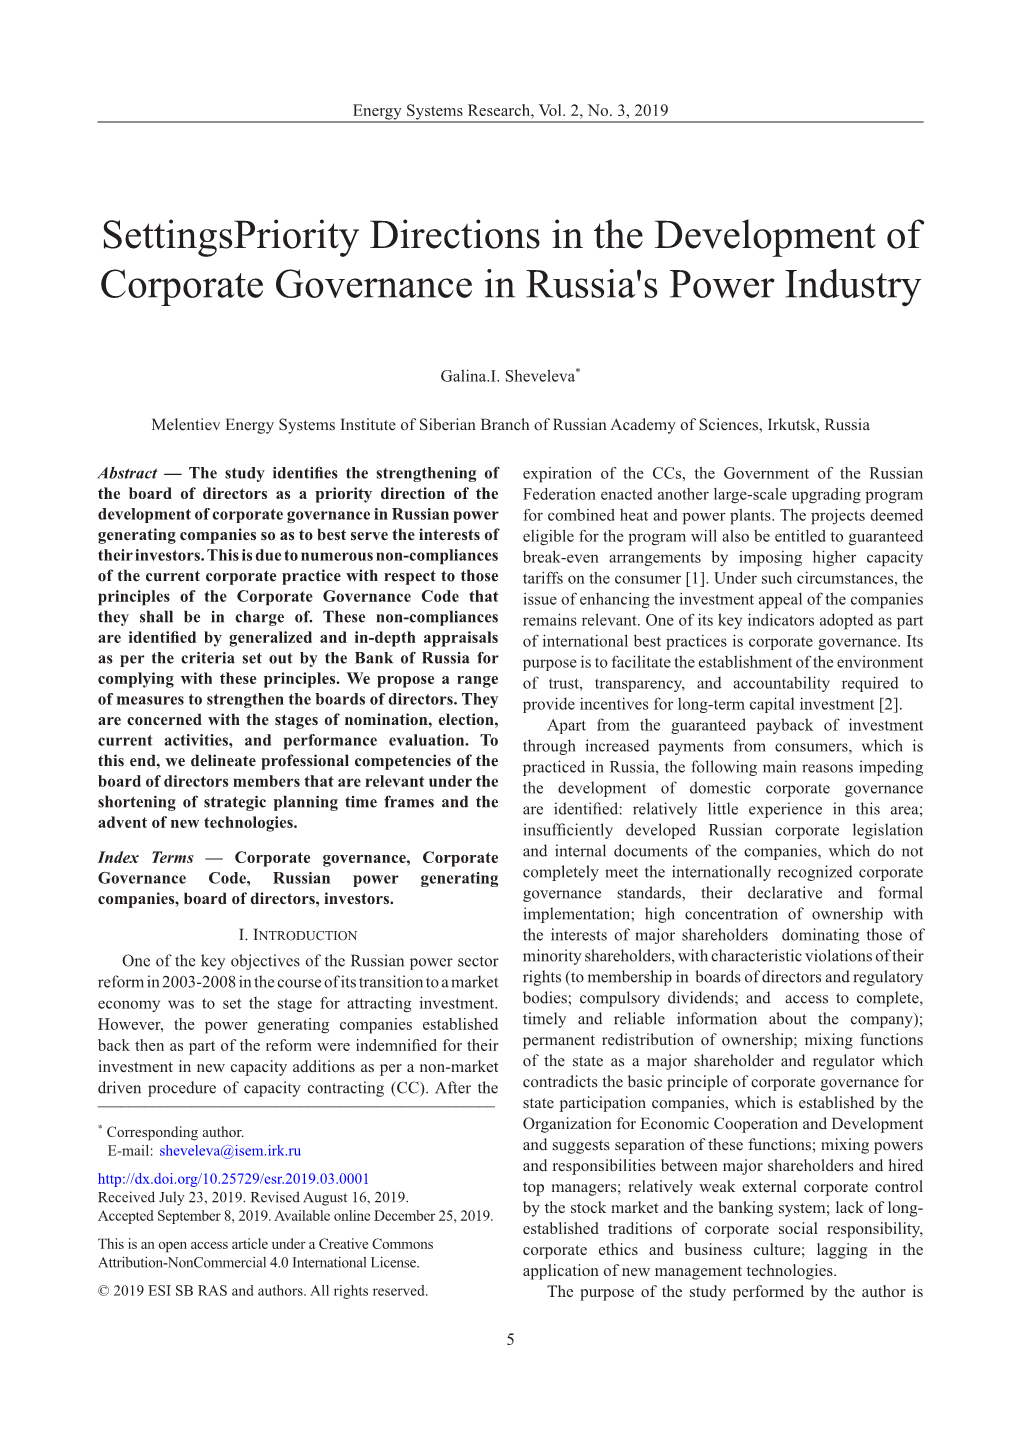 Settingspriority Directions in the Development of Corporate Governance in Russia's Power Industry